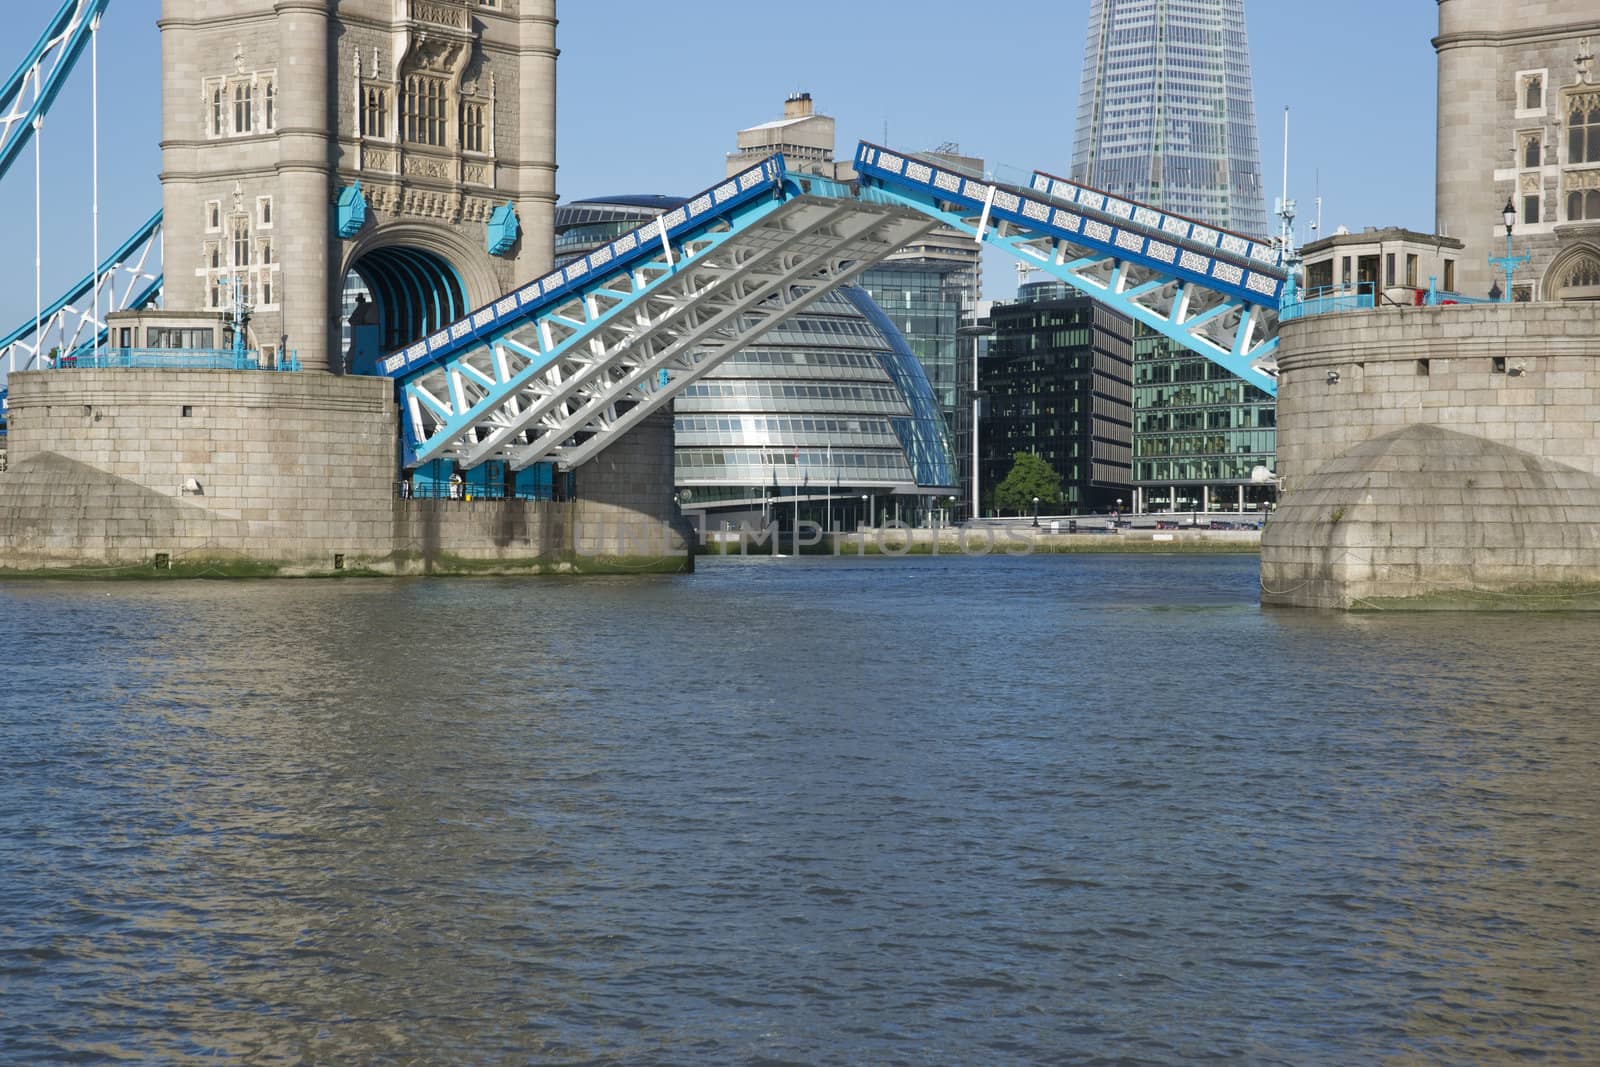 Tower Bridge in open position to allow passage of ships and boats. Historic bridge across the River Thames in London, England